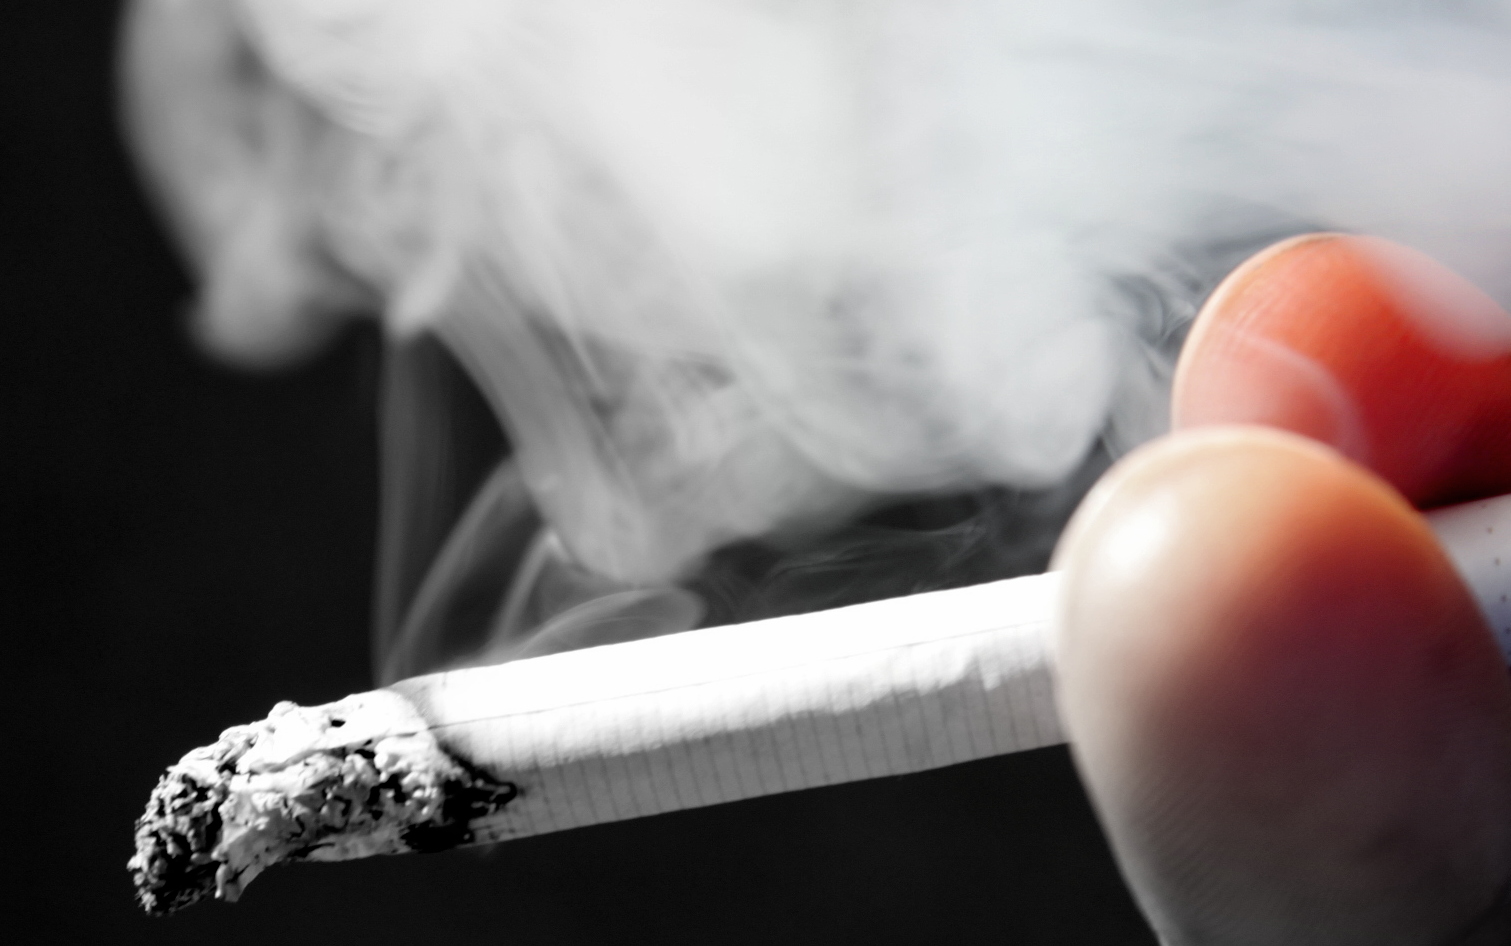 Smoking causes one in 10 deaths worldwide, new study shows